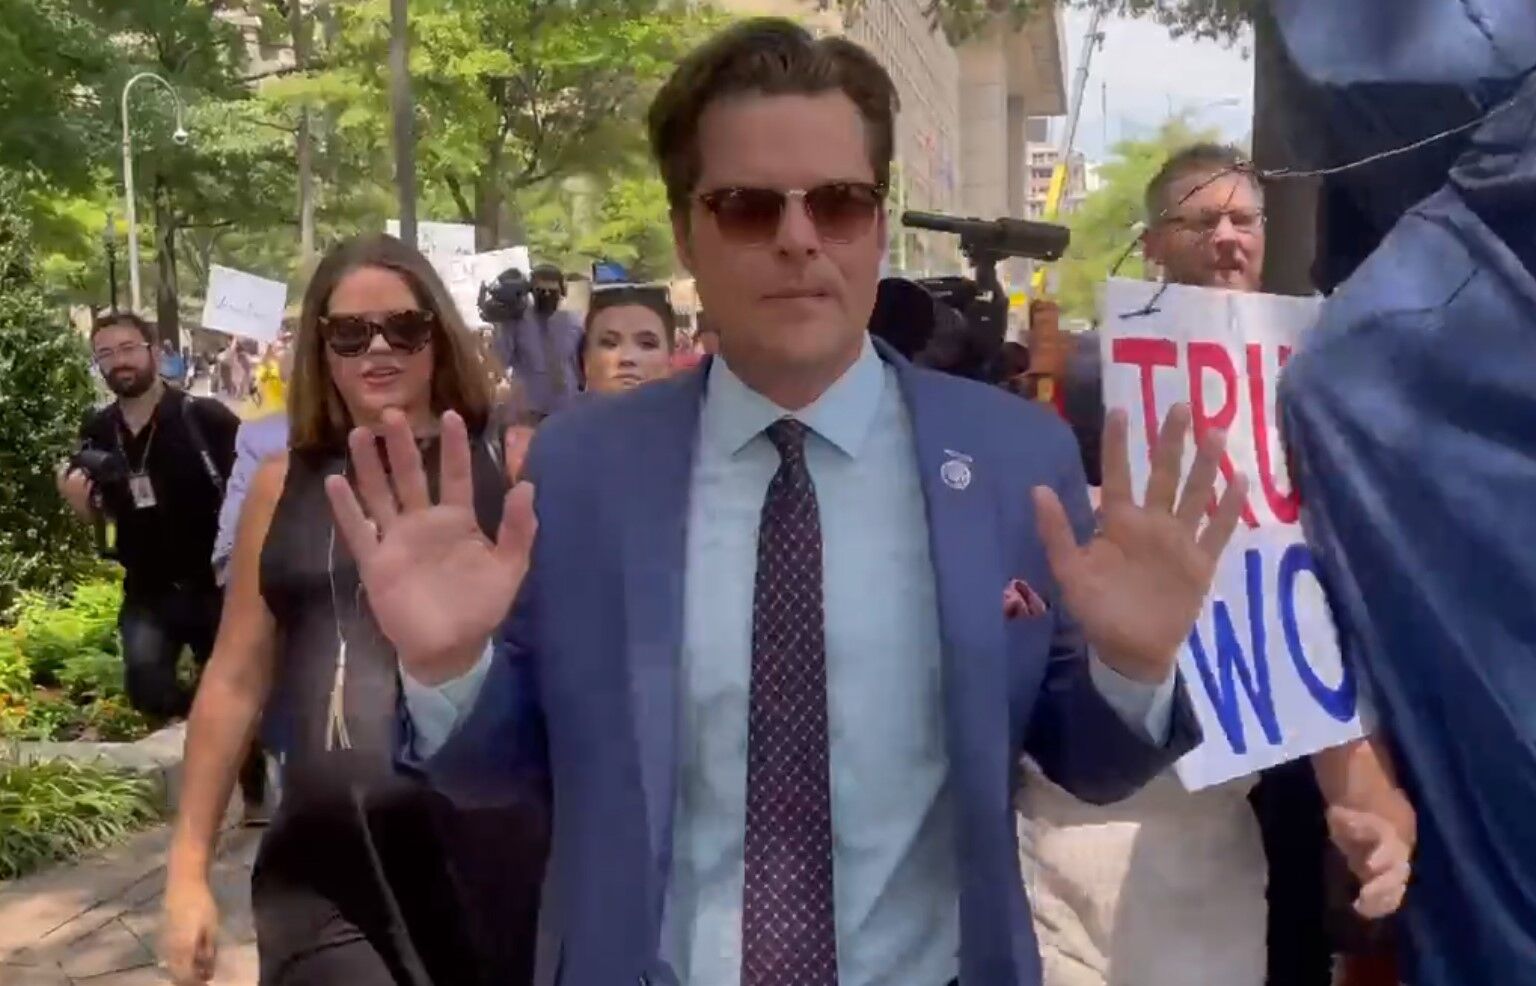 Rep. Matt Gaetz running away from the press conference as a woman asked if he's a pedophile